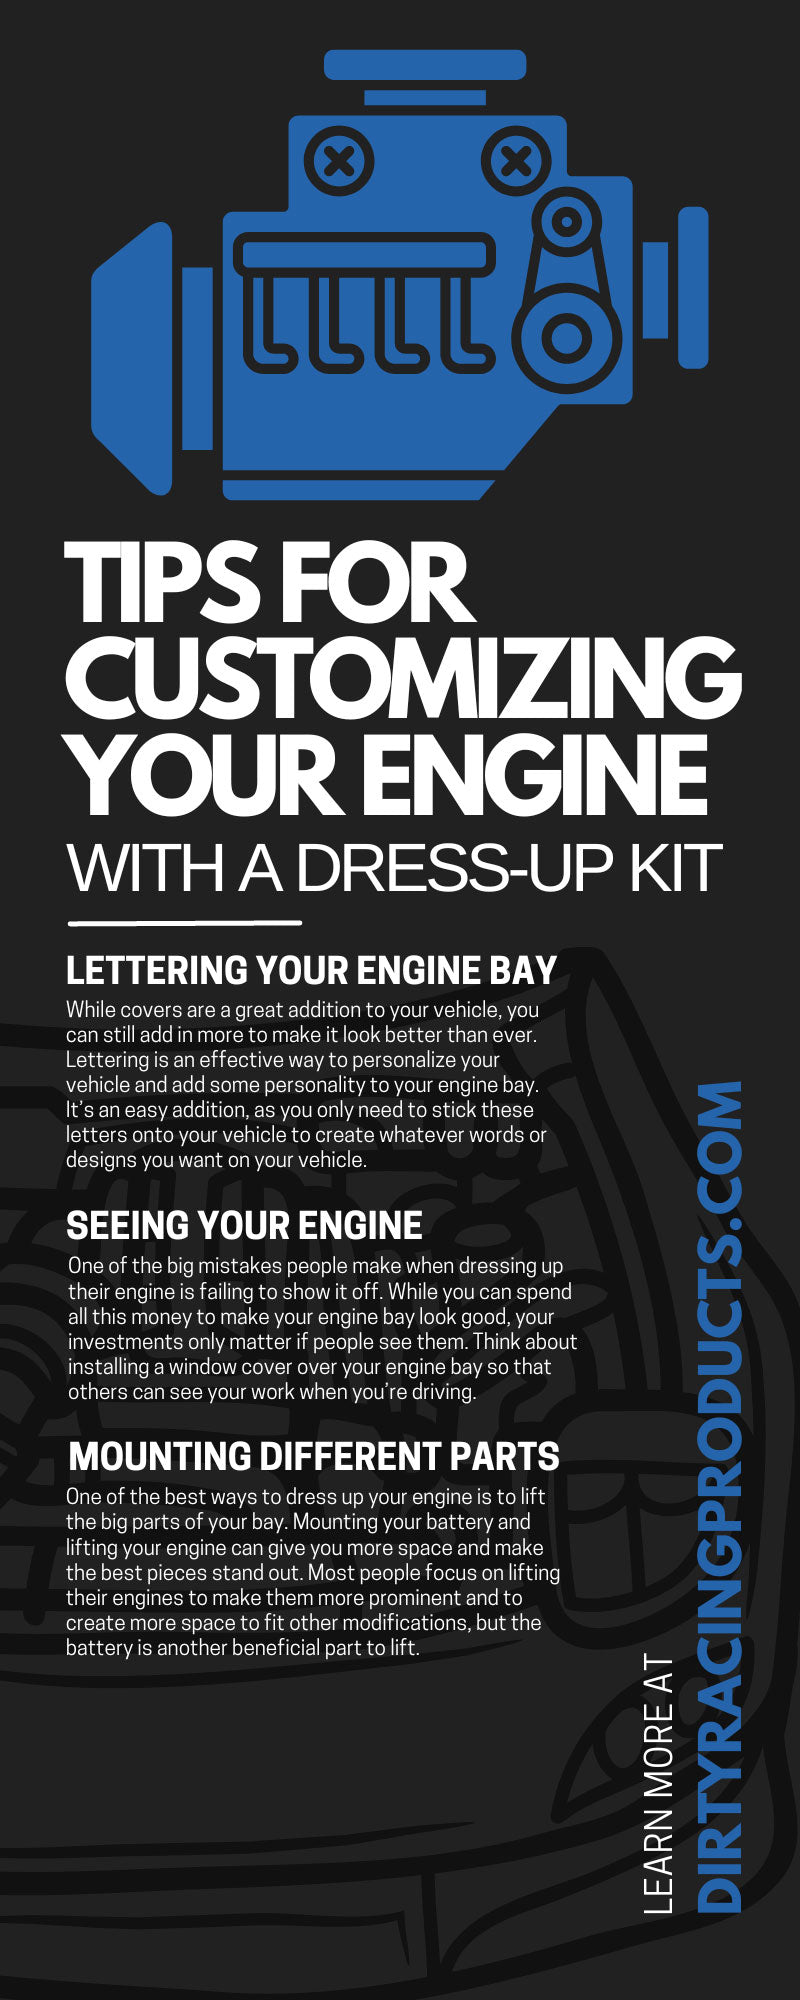 7 Tips for Customizing Your Engine With a Dress-Up Kit